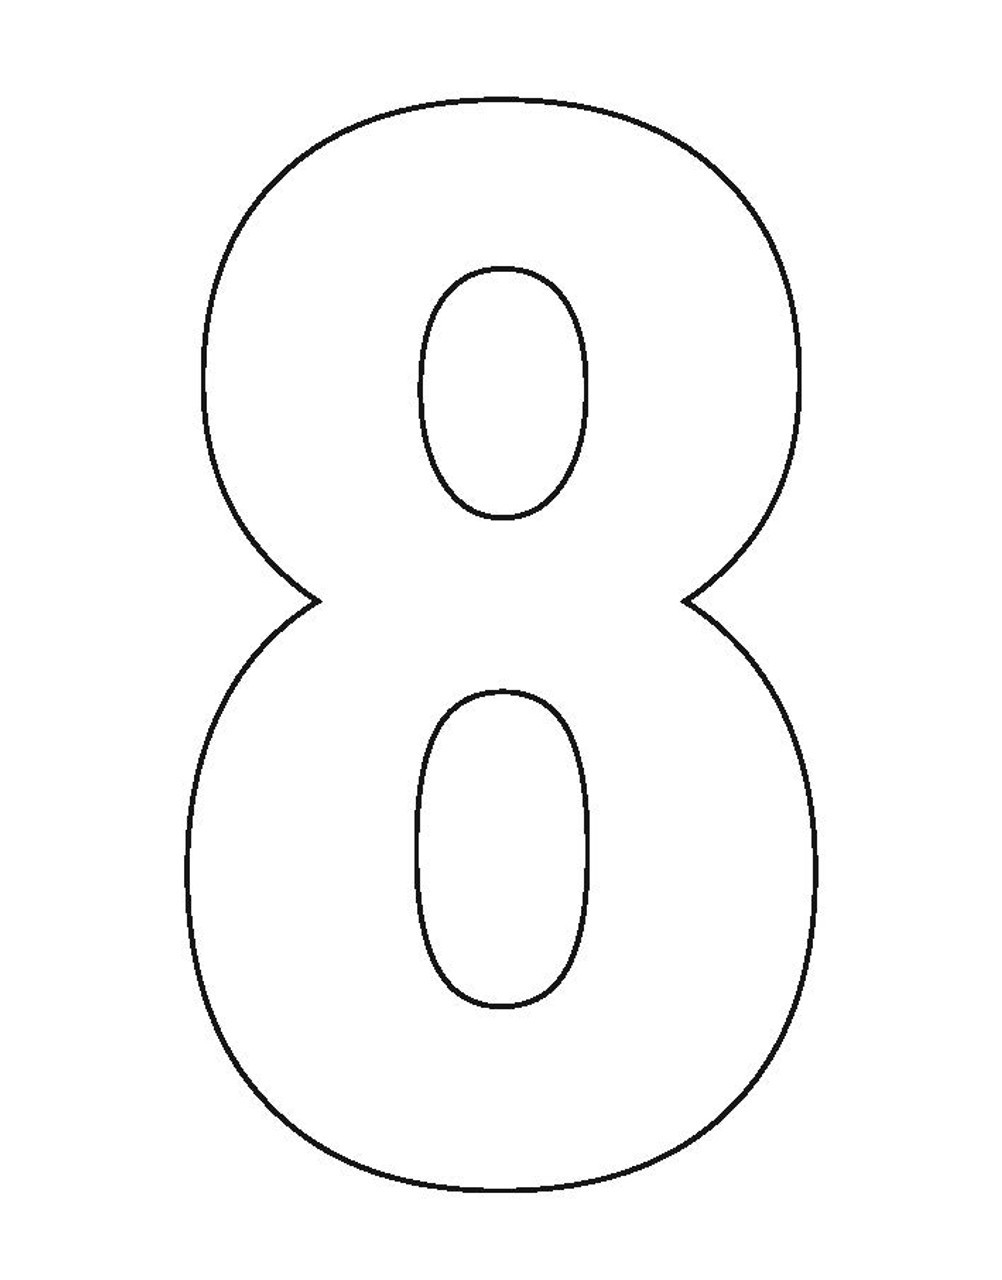 PCNUM08 - A generously sized white sticker of the number 8